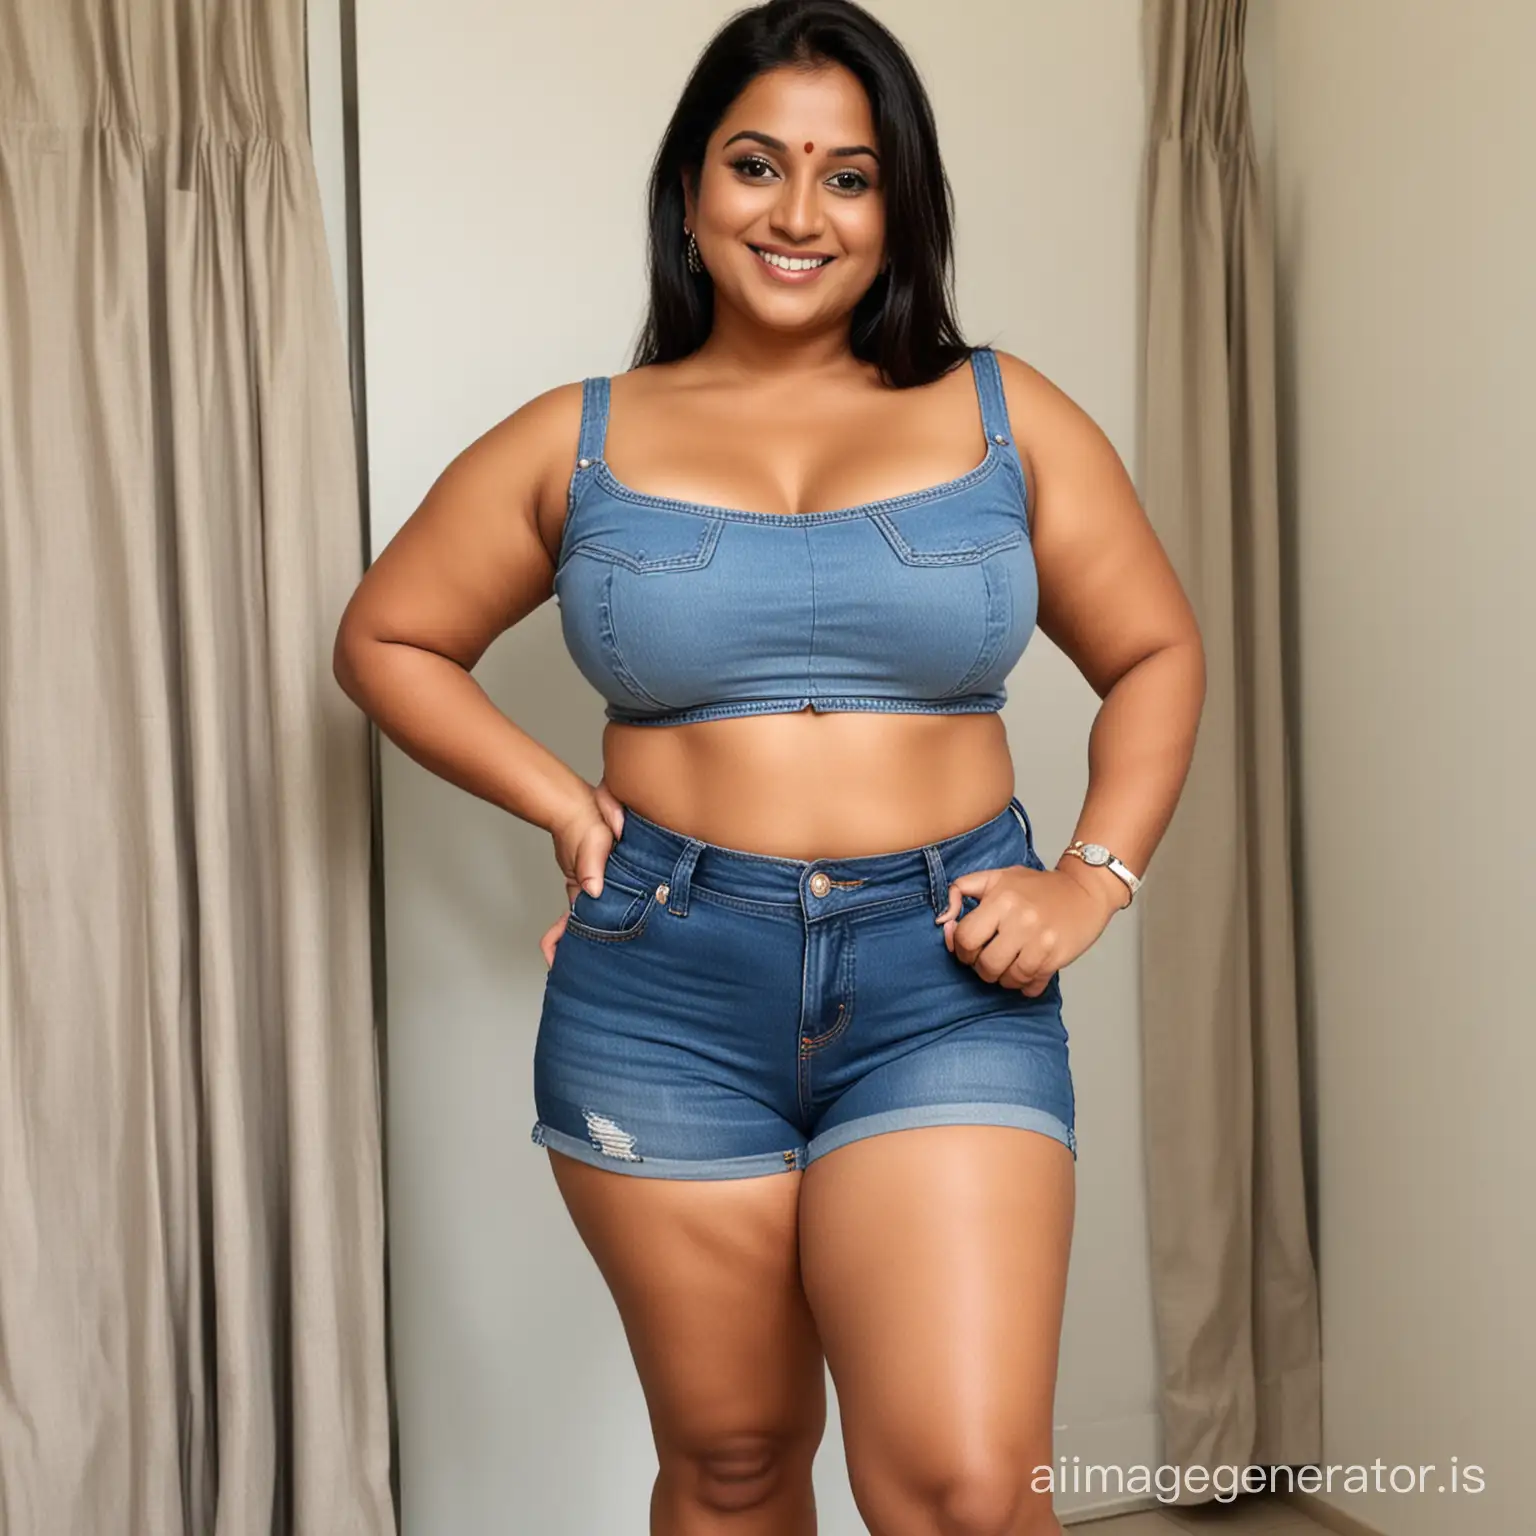 Chubby Indian 50 year old mom in croptop boots and tight jean shorts tall curvy and sexy look standing. Shows her clevage. Her look is aluring and smiling with lust